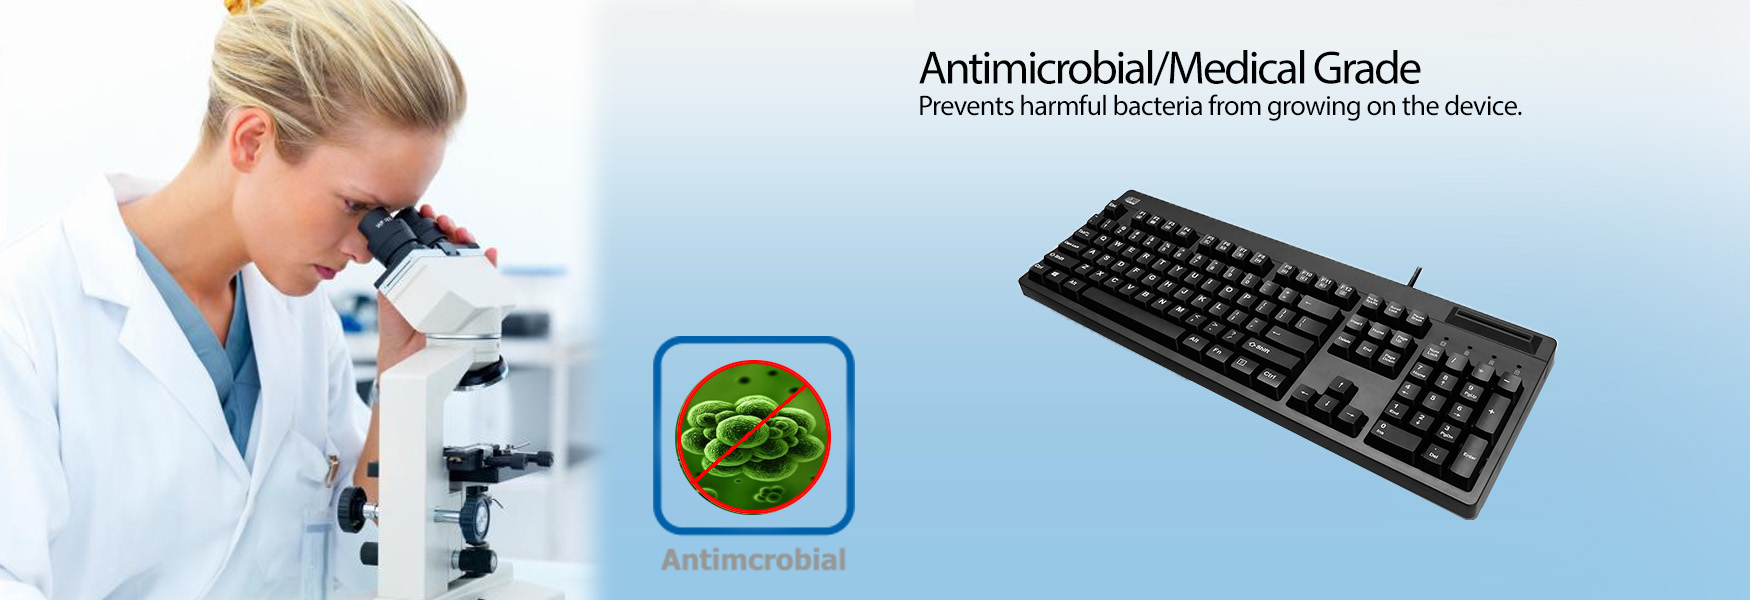 AKB-630S-Antimicrobial